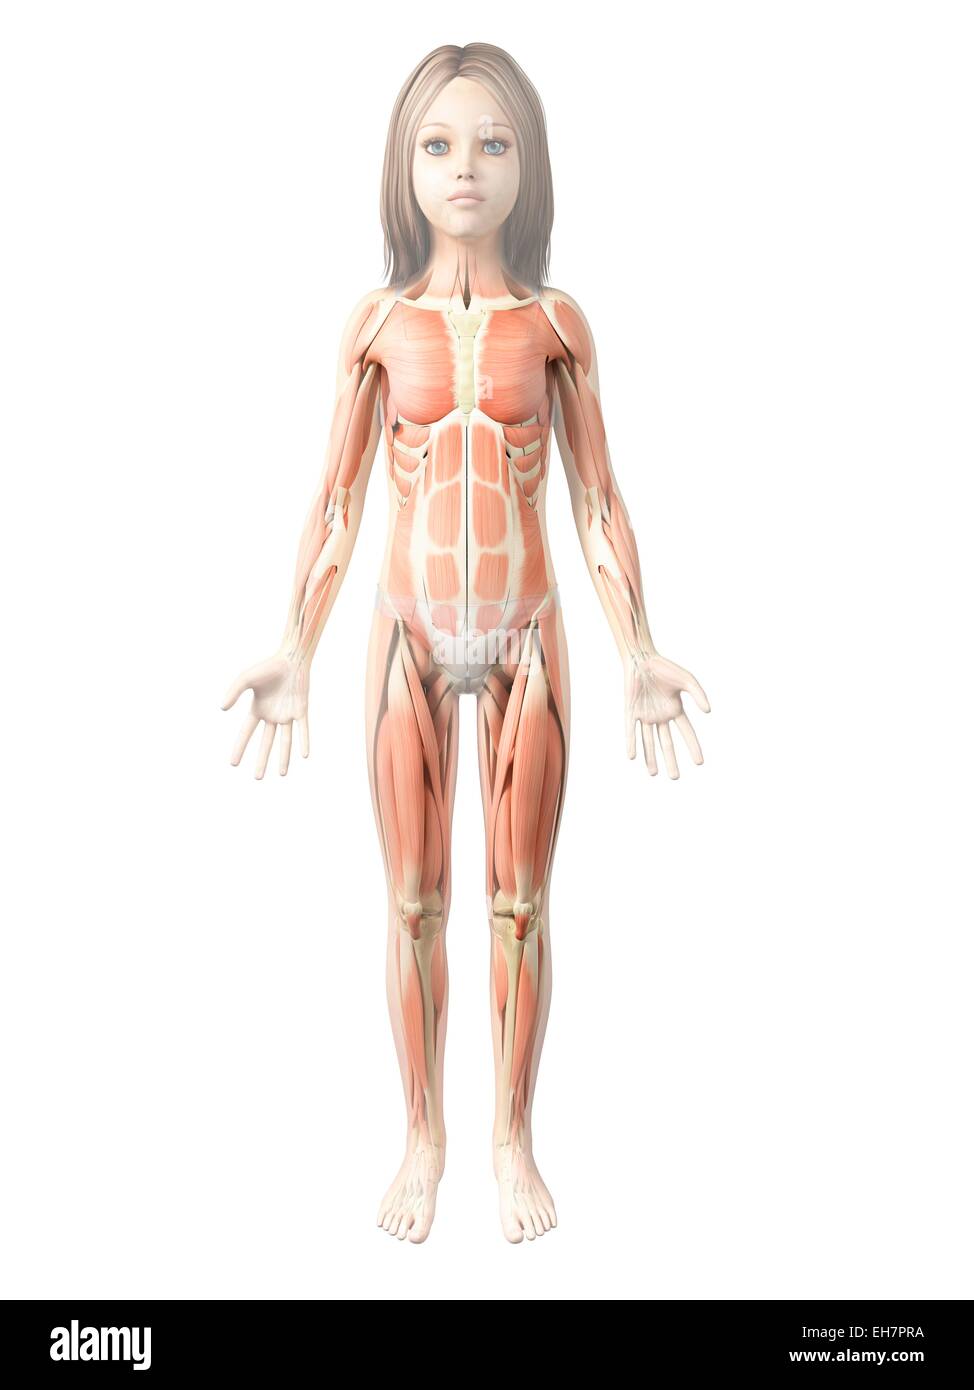 Muscular system of girl, illustration Stock Photo